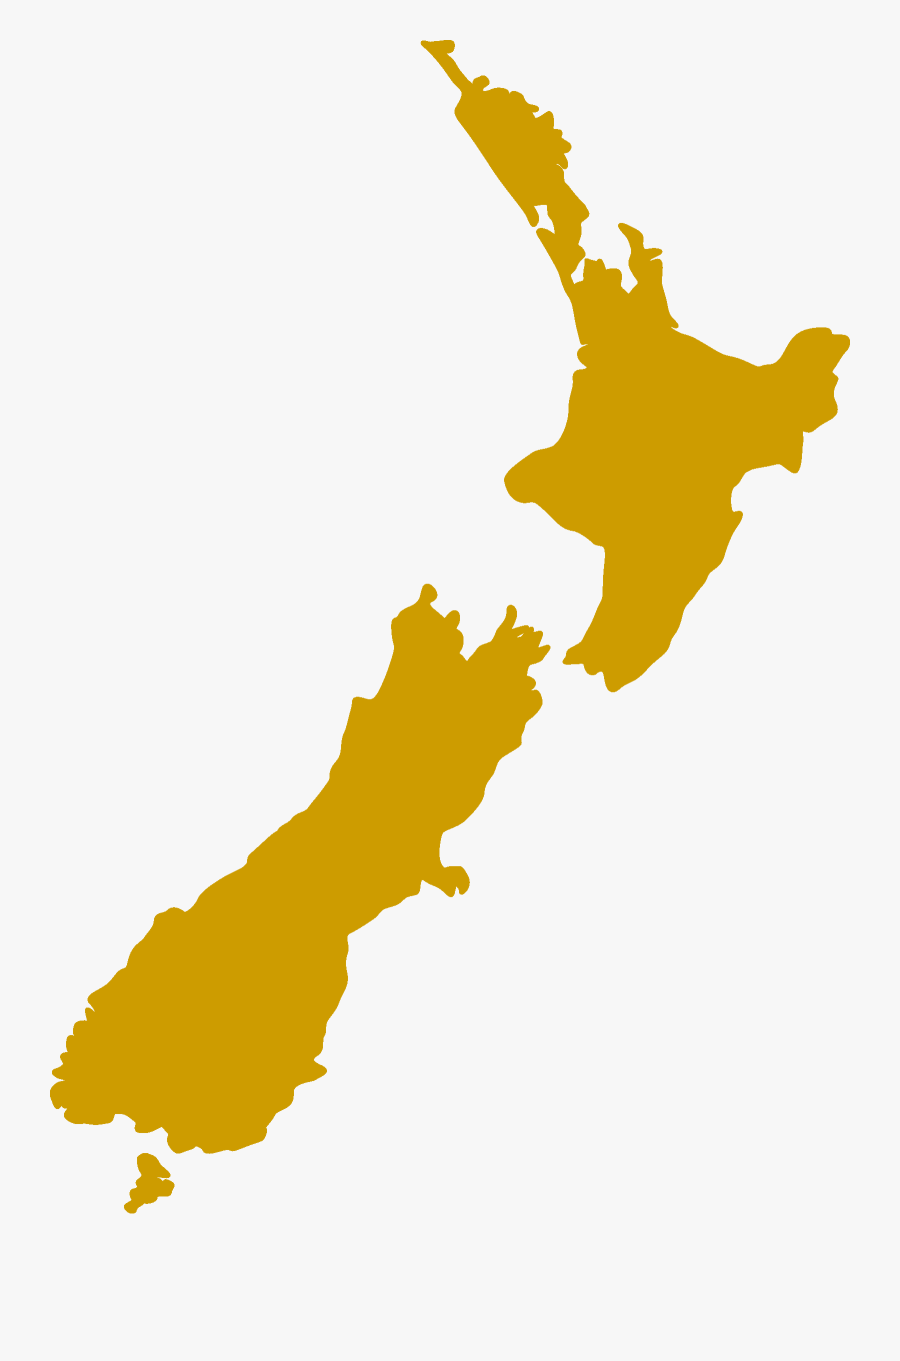 Transparent China Map Outline Png - New Zealand Gdp Map, Transparent Clipart